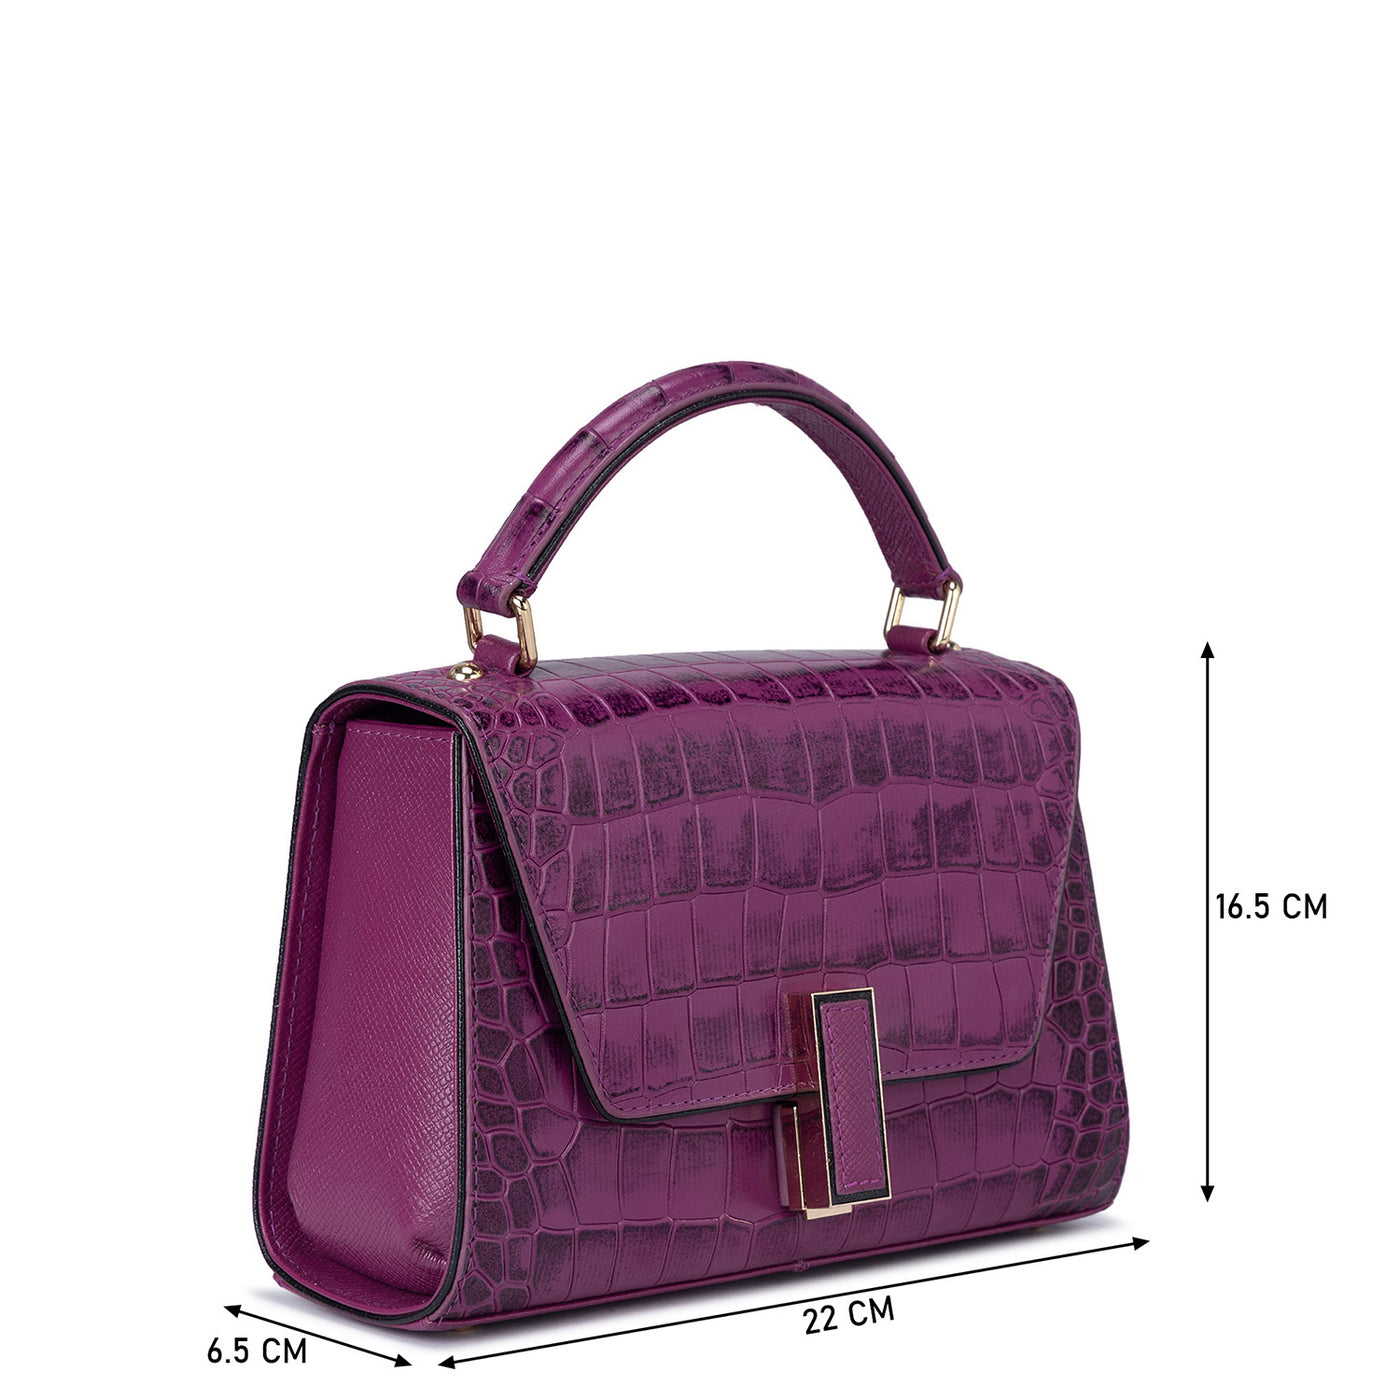 Small Croco Leather Satchel - Orchid